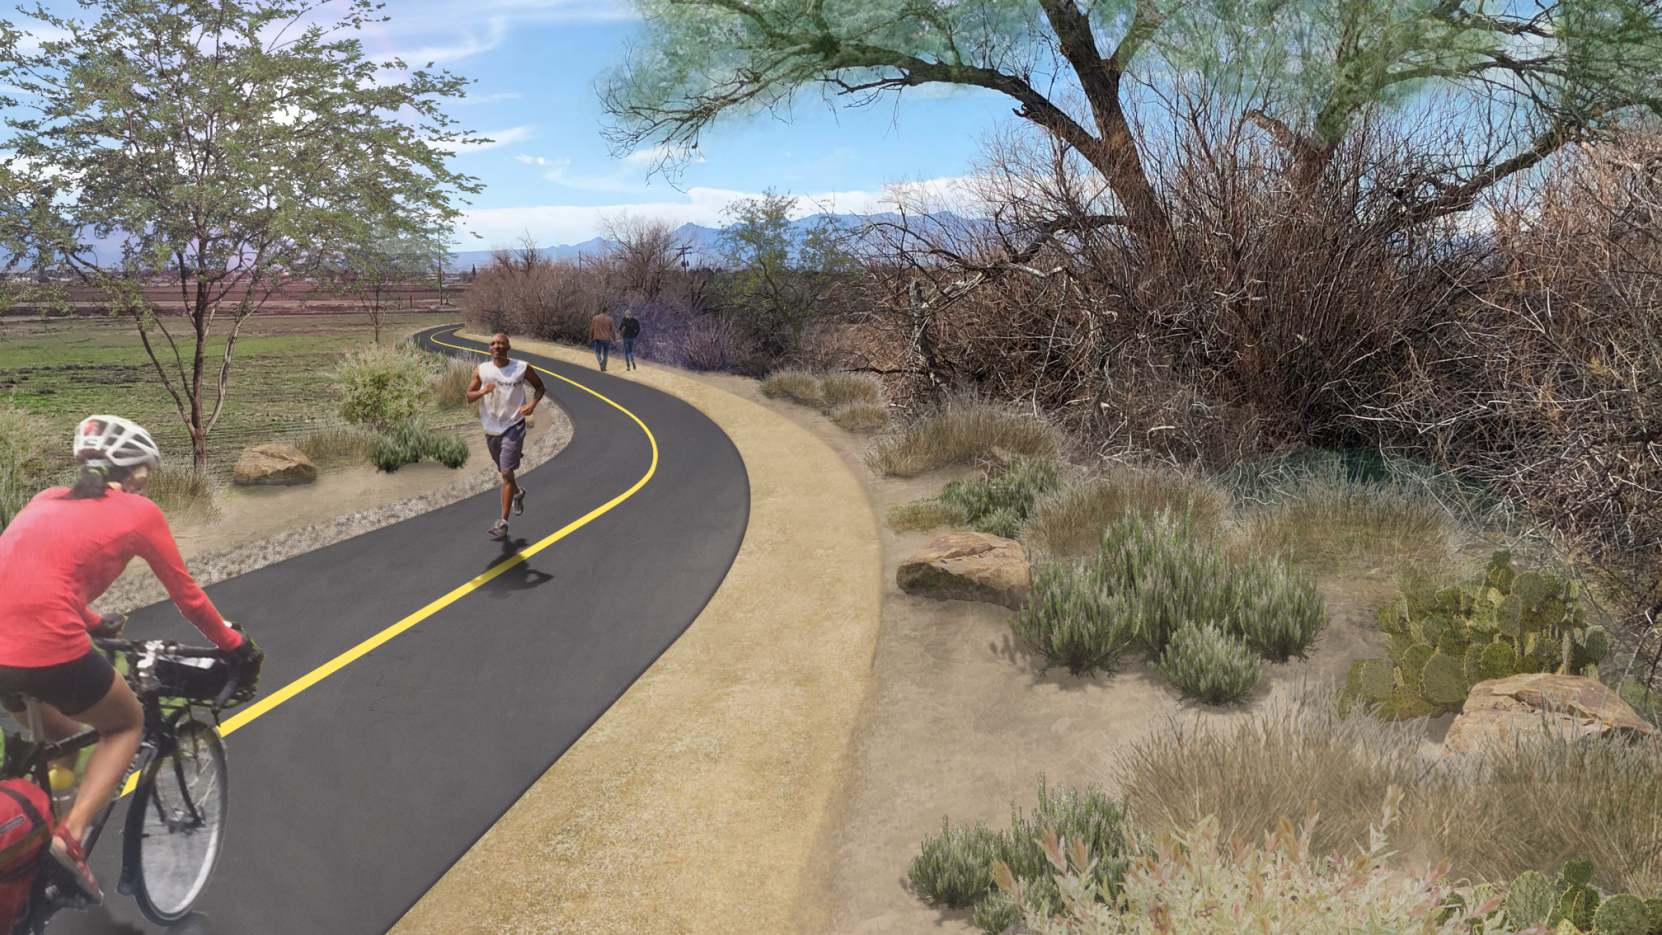 Land donation clears way for Gila River trail in Safford